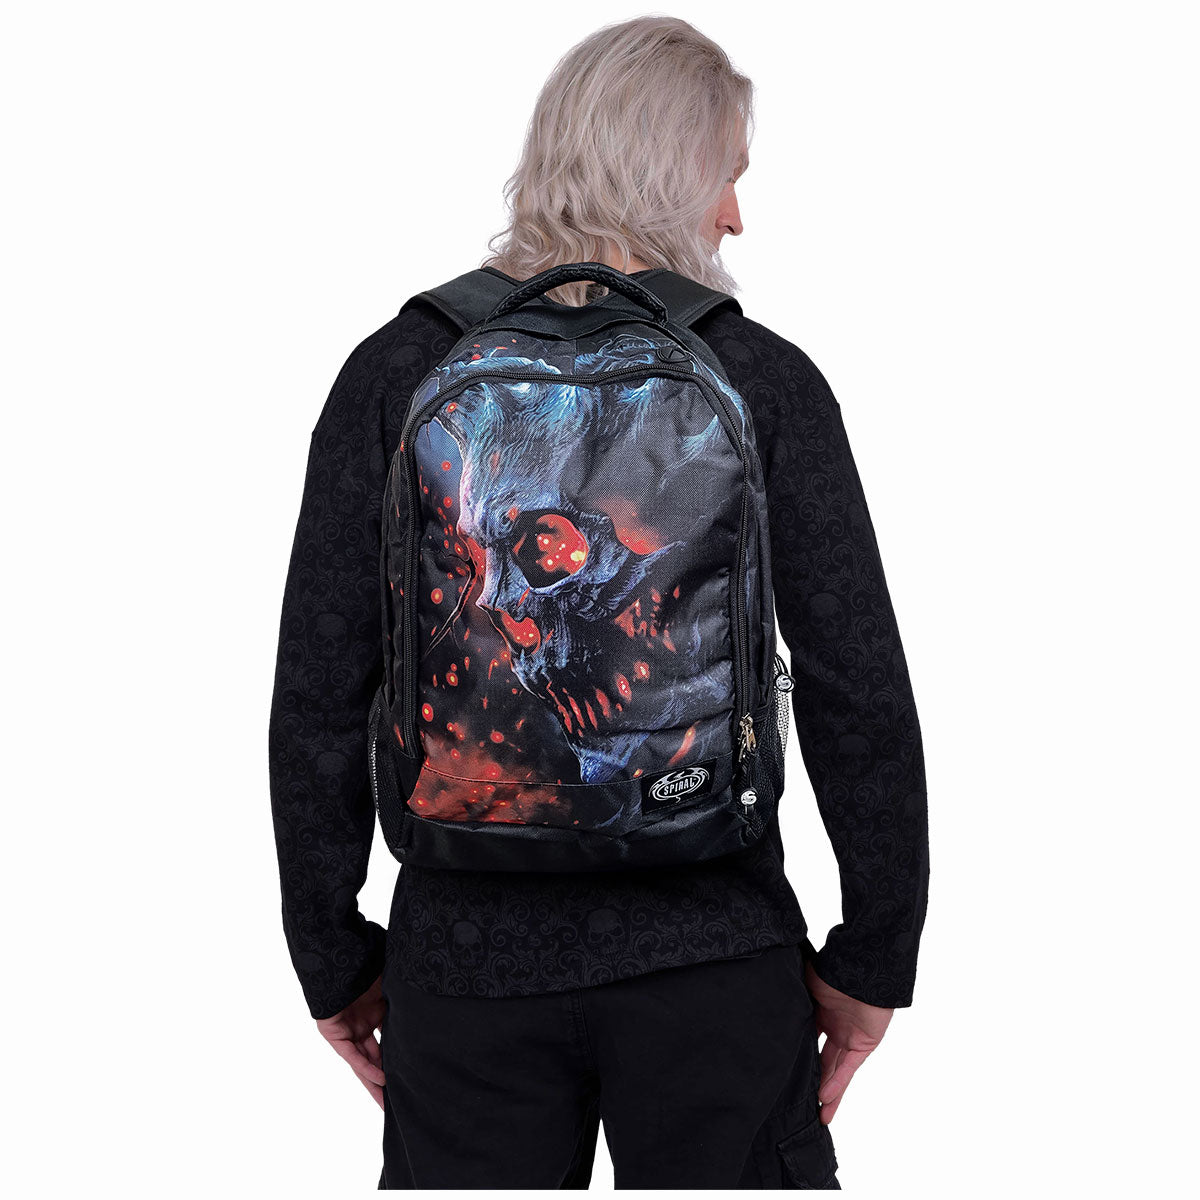 DEATH EMBERS - Back Pack - With Laptop Pocket